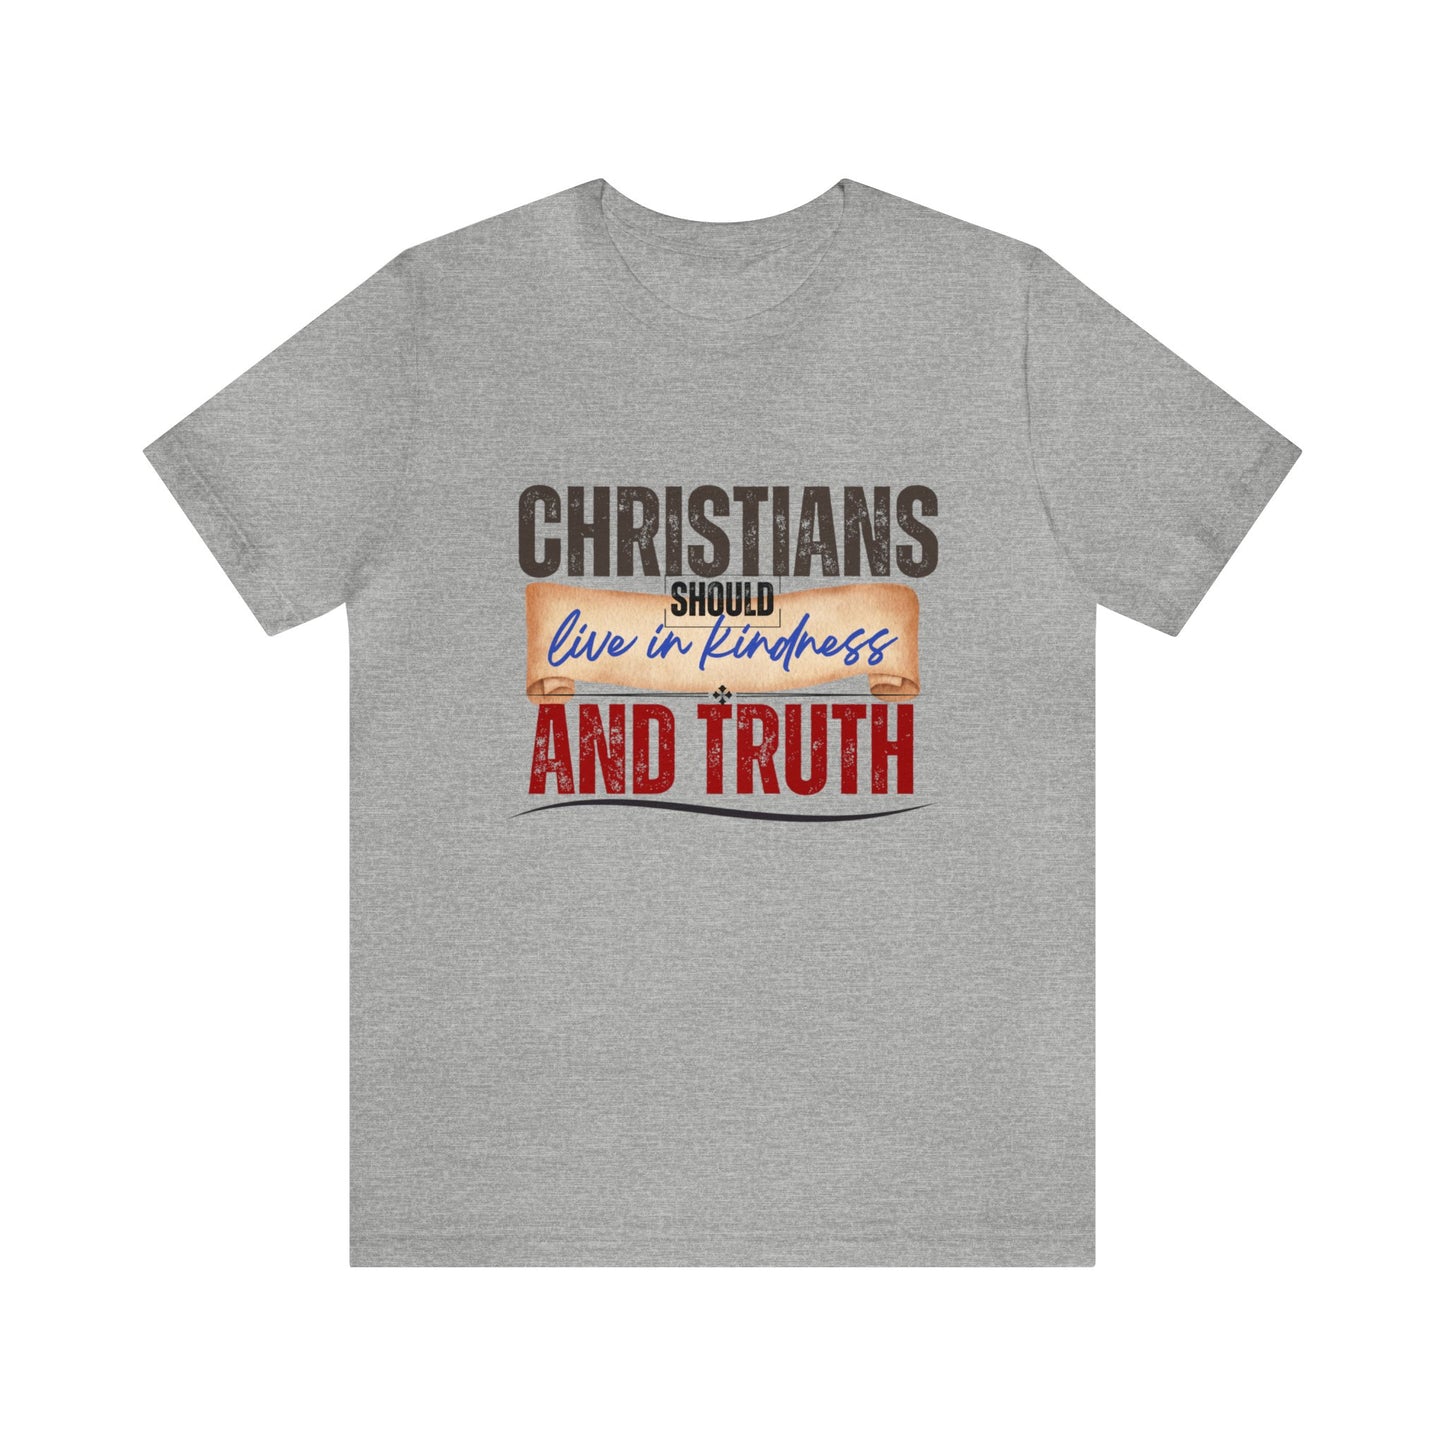 Kindness and Truth, Christian T-shirt for Men and Women